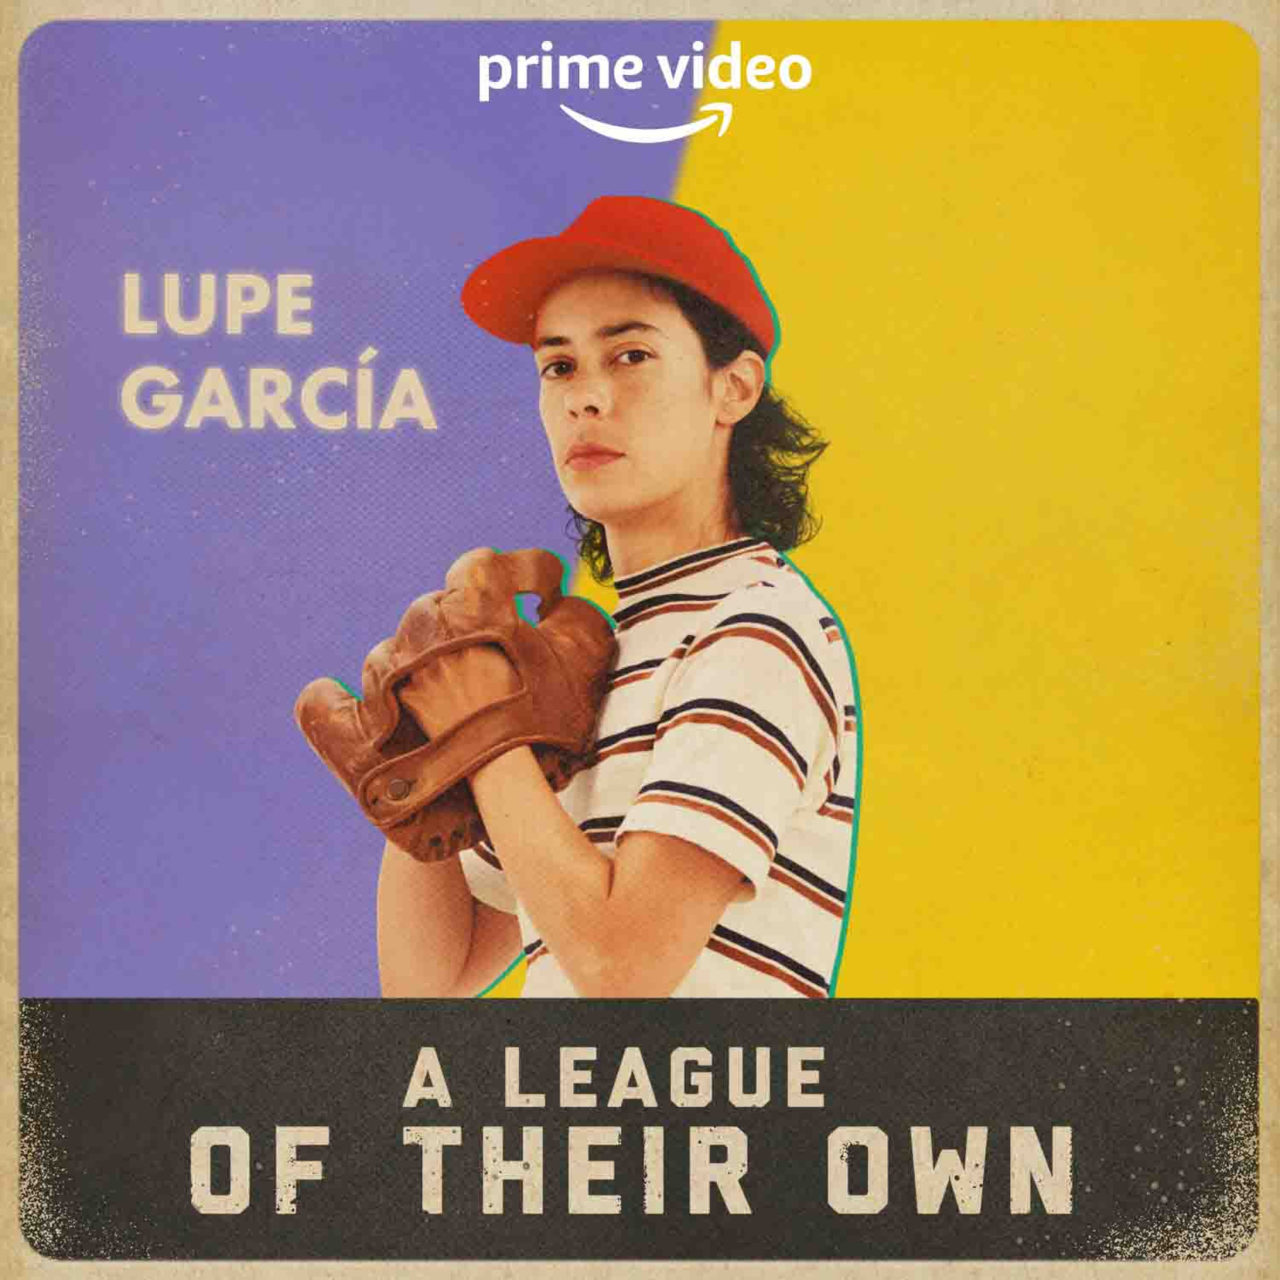 A League Of Their Own character poster (Prime Video/Sony Pictures Television)